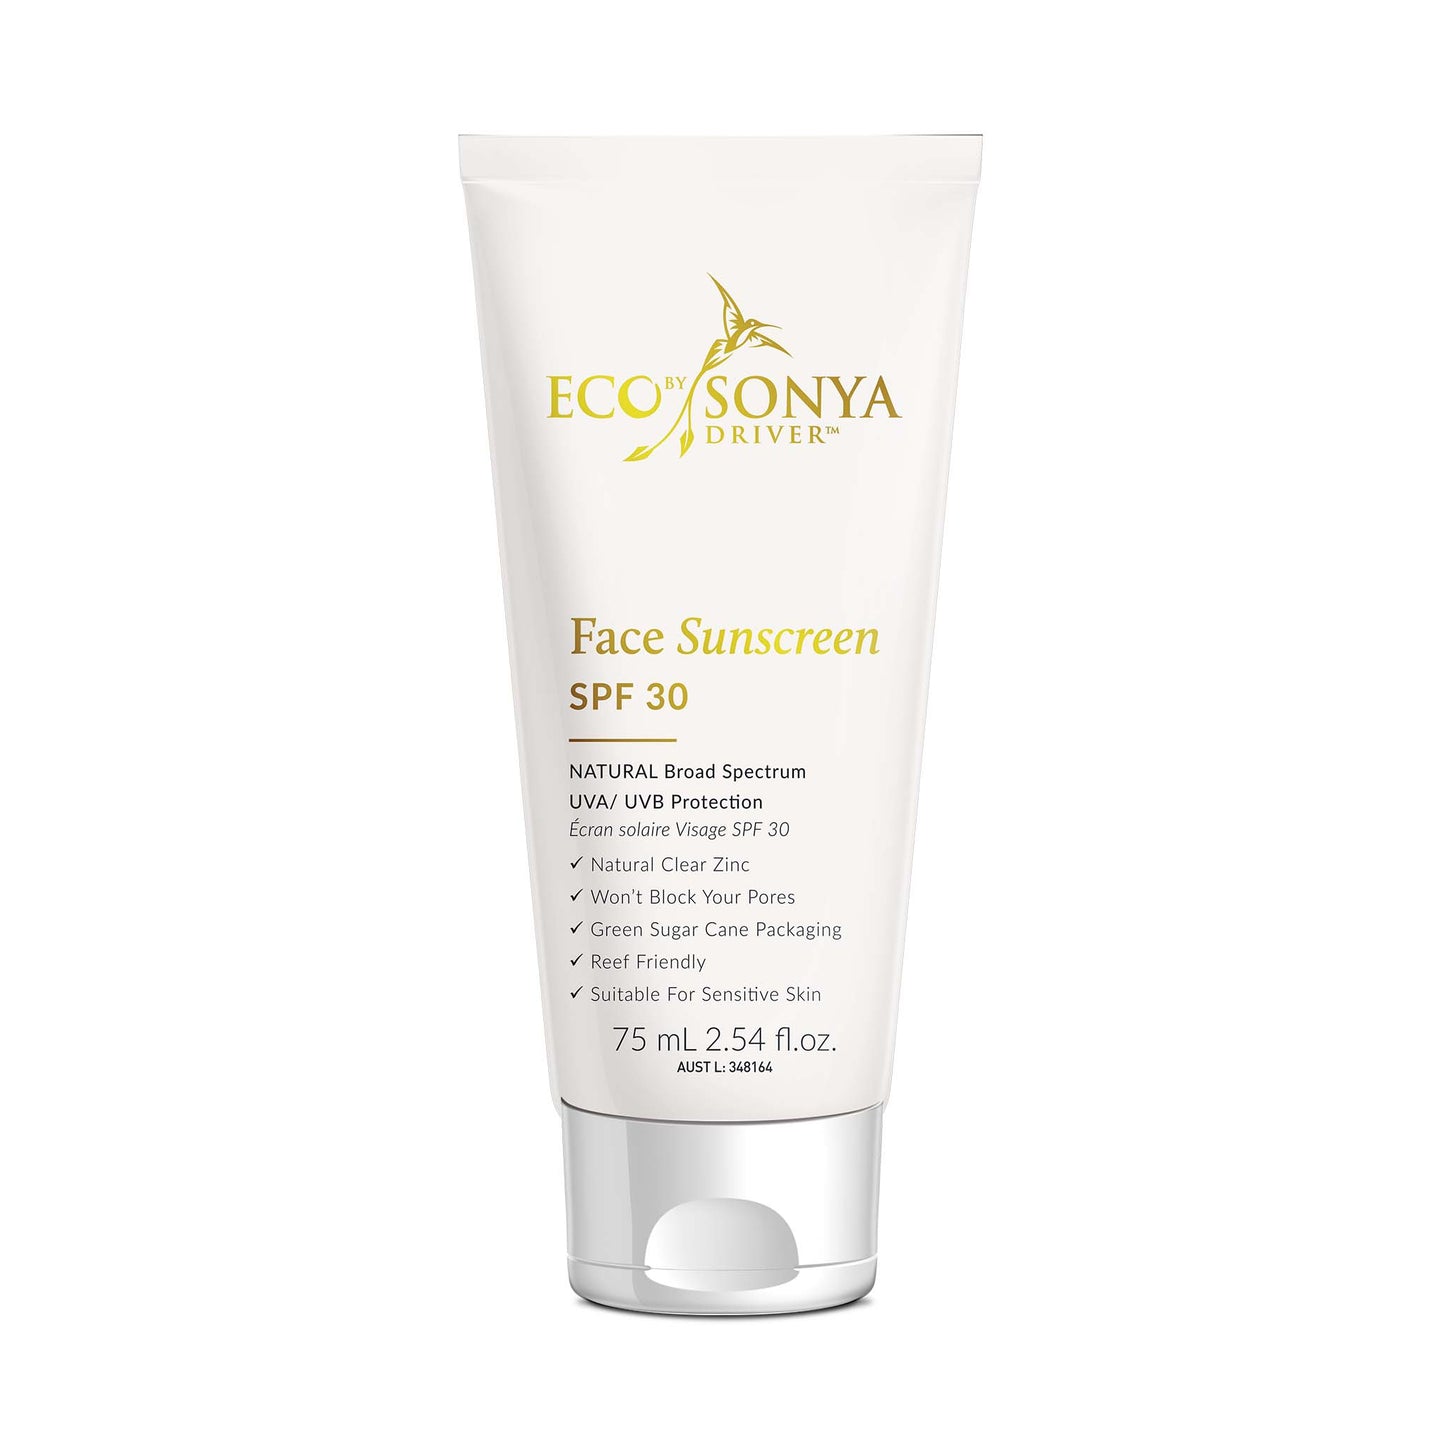 ECO BY SONYA Face Sunscreen